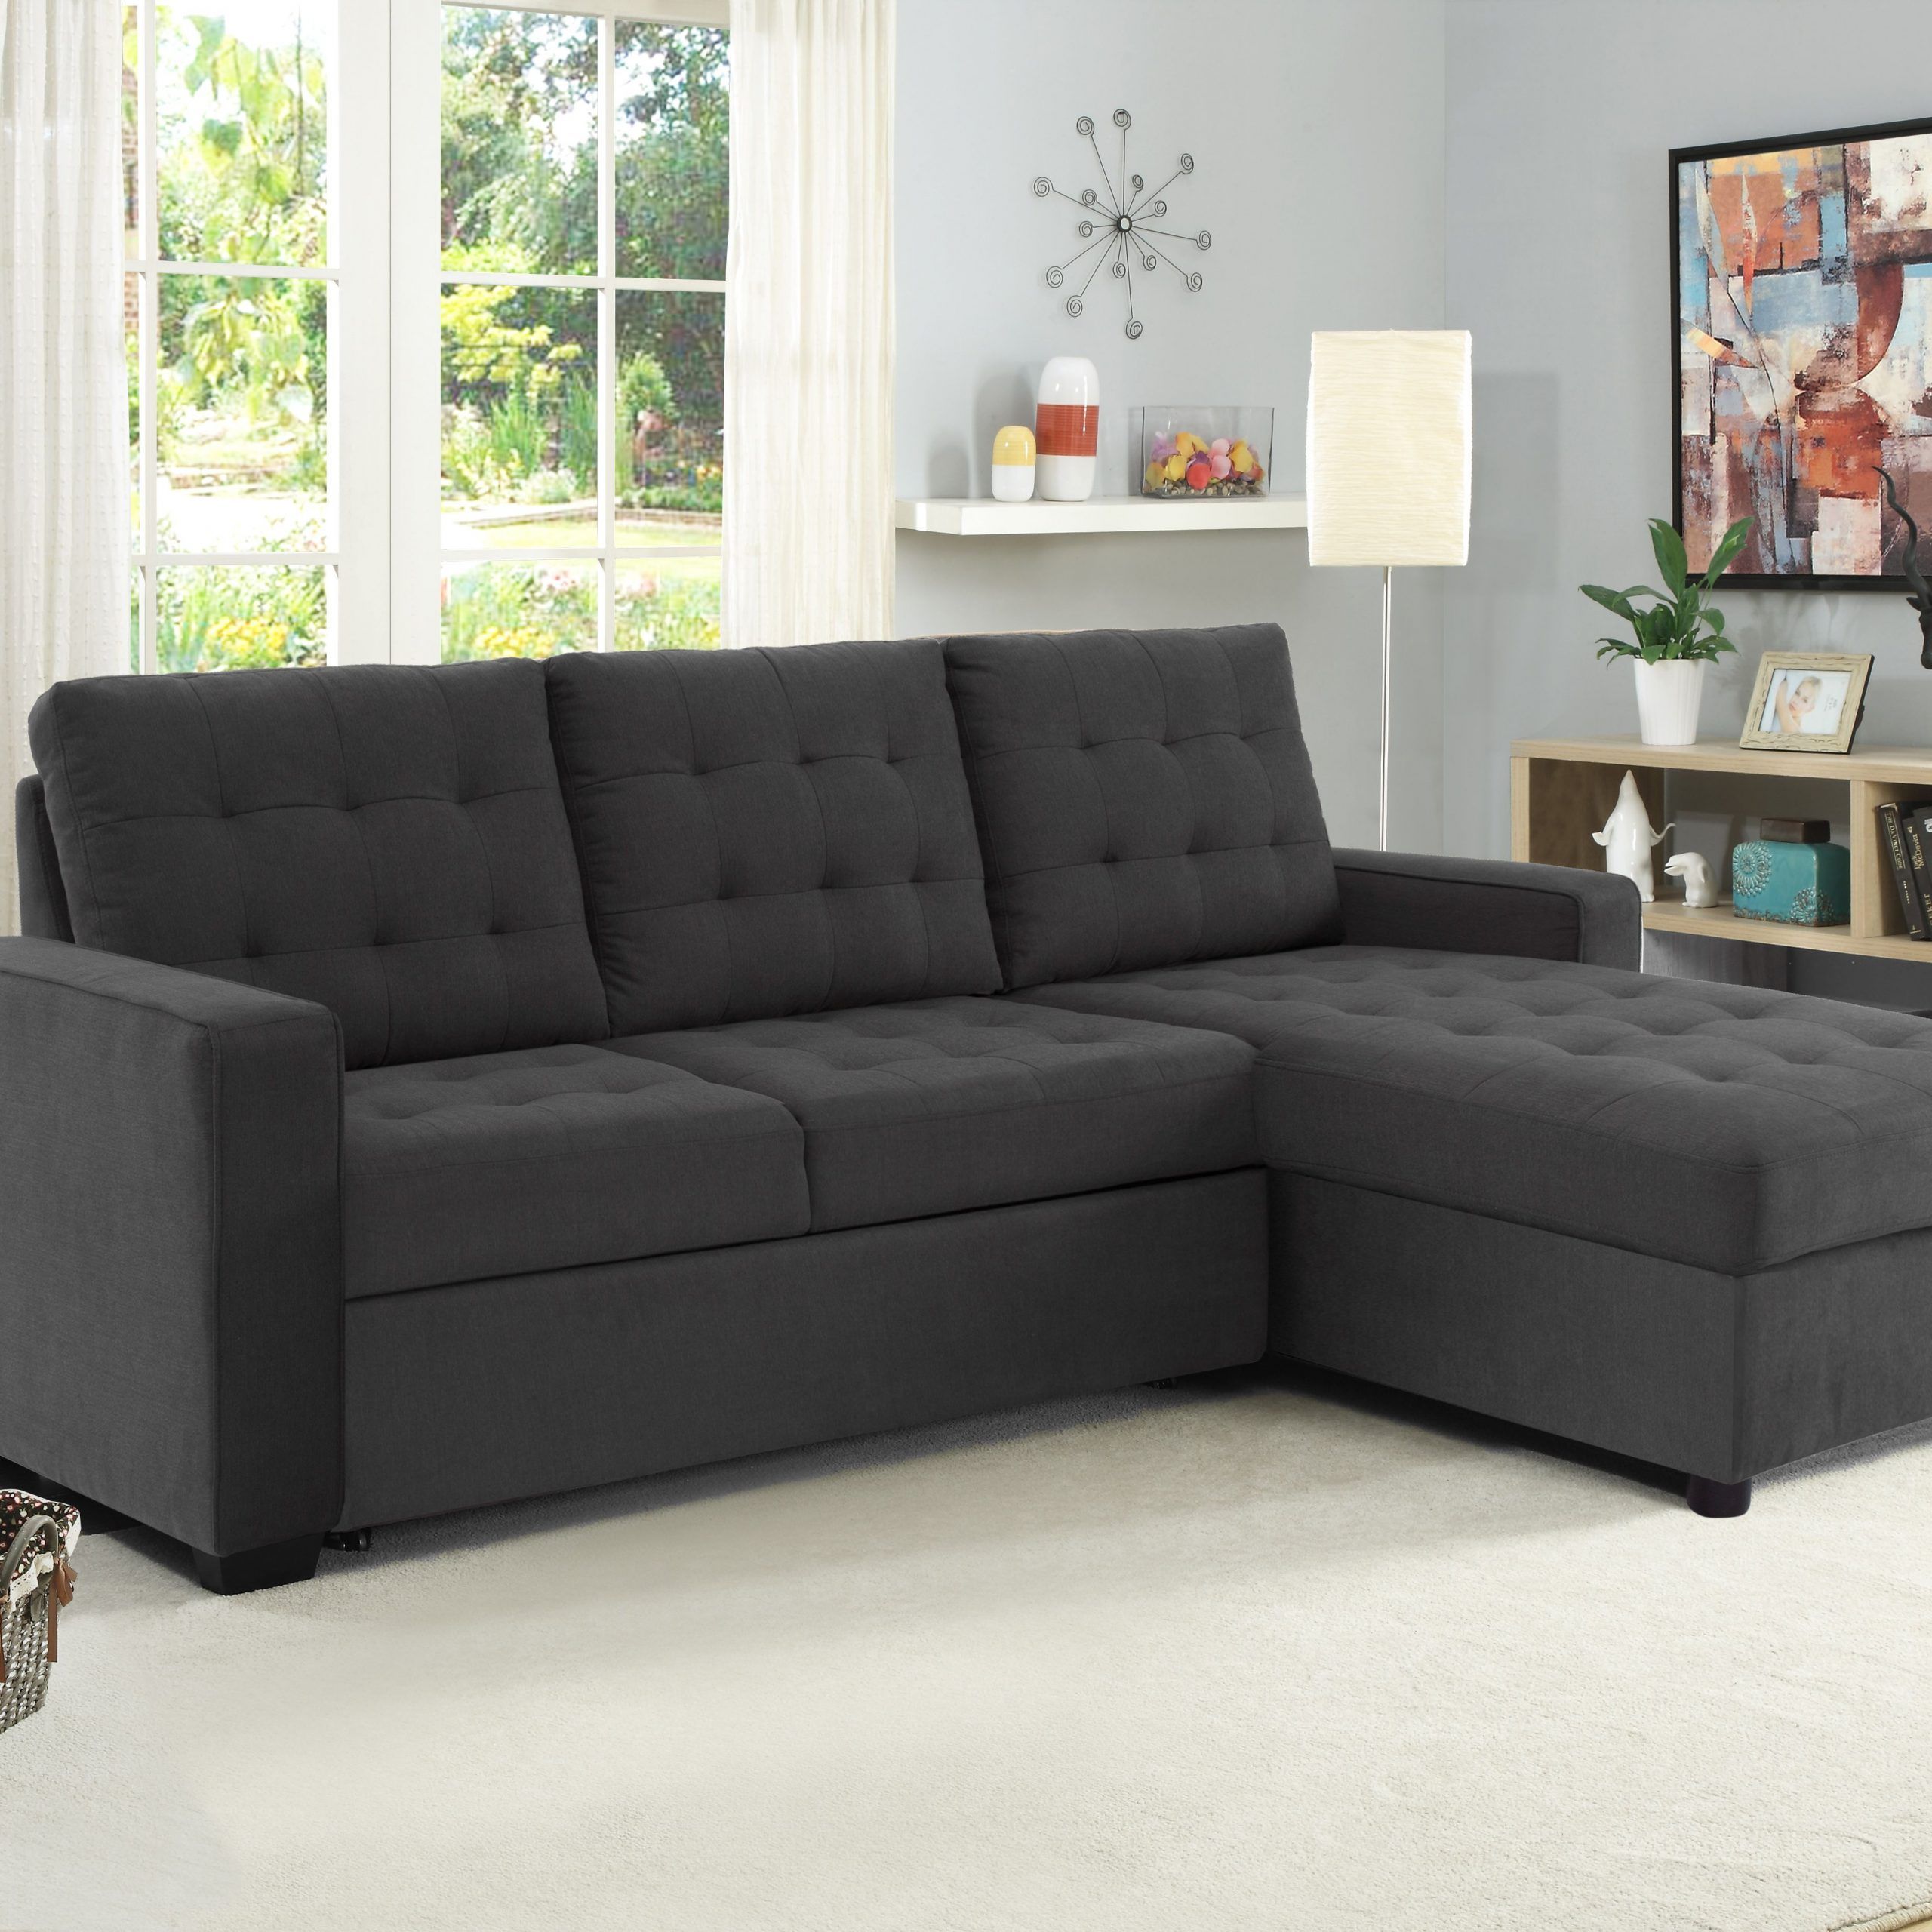 Buy Serta Bostal Sectional Sofa Convertible: Converts Into For Live It Cozy Sectional Sofa Beds With Storage (View 2 of 15)